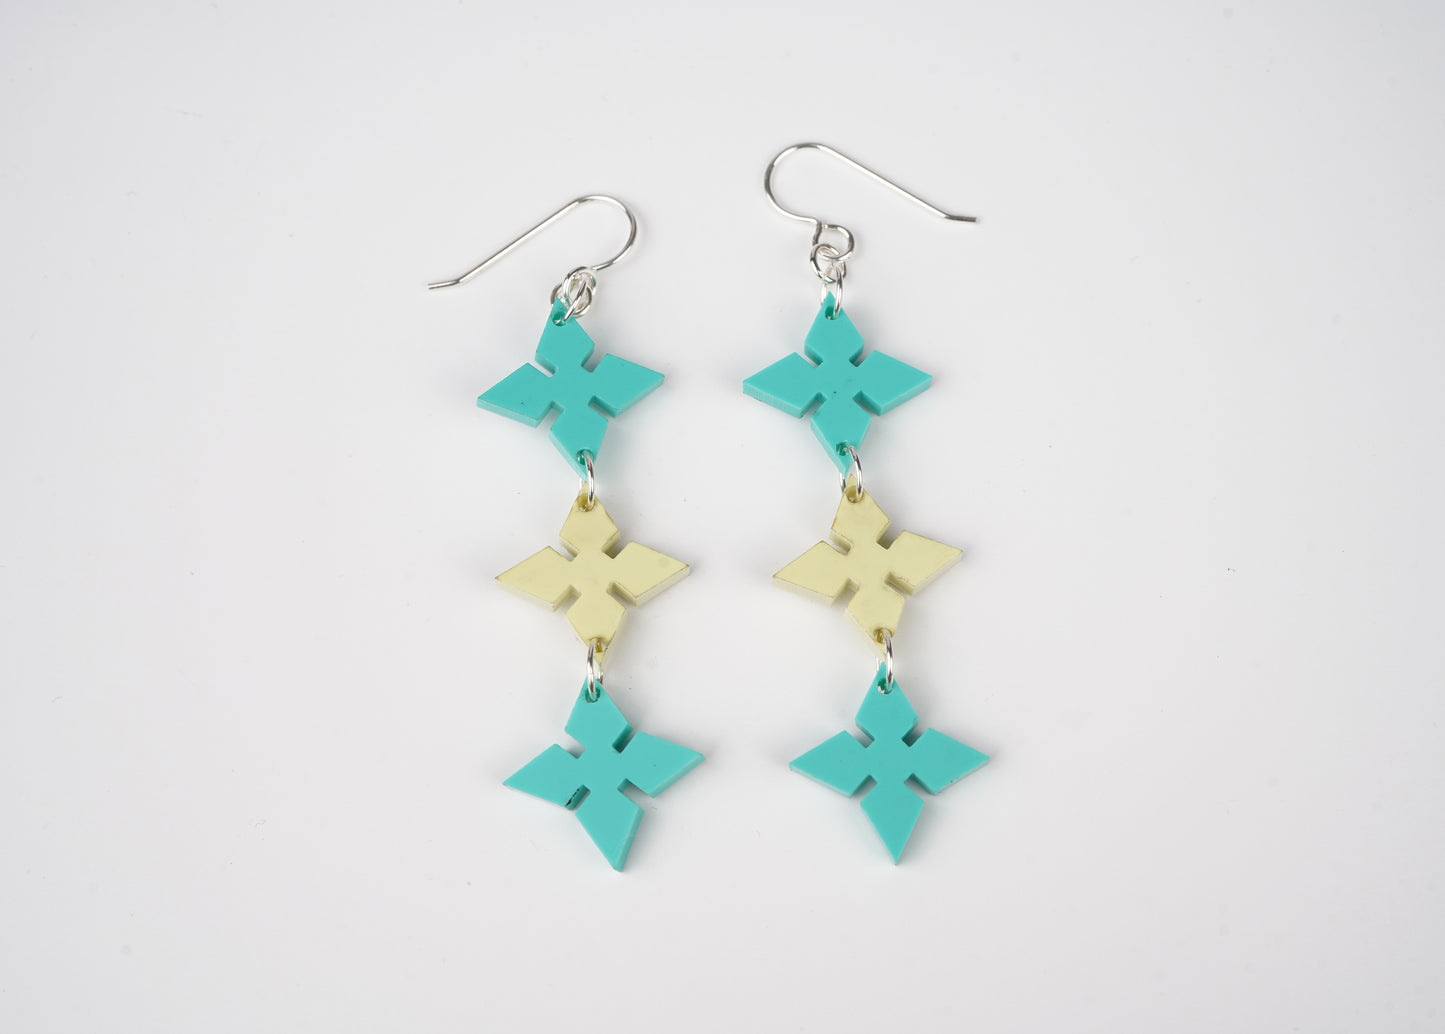 Pointed Diamond Dangle Earrings- Teal and Pale Yellow